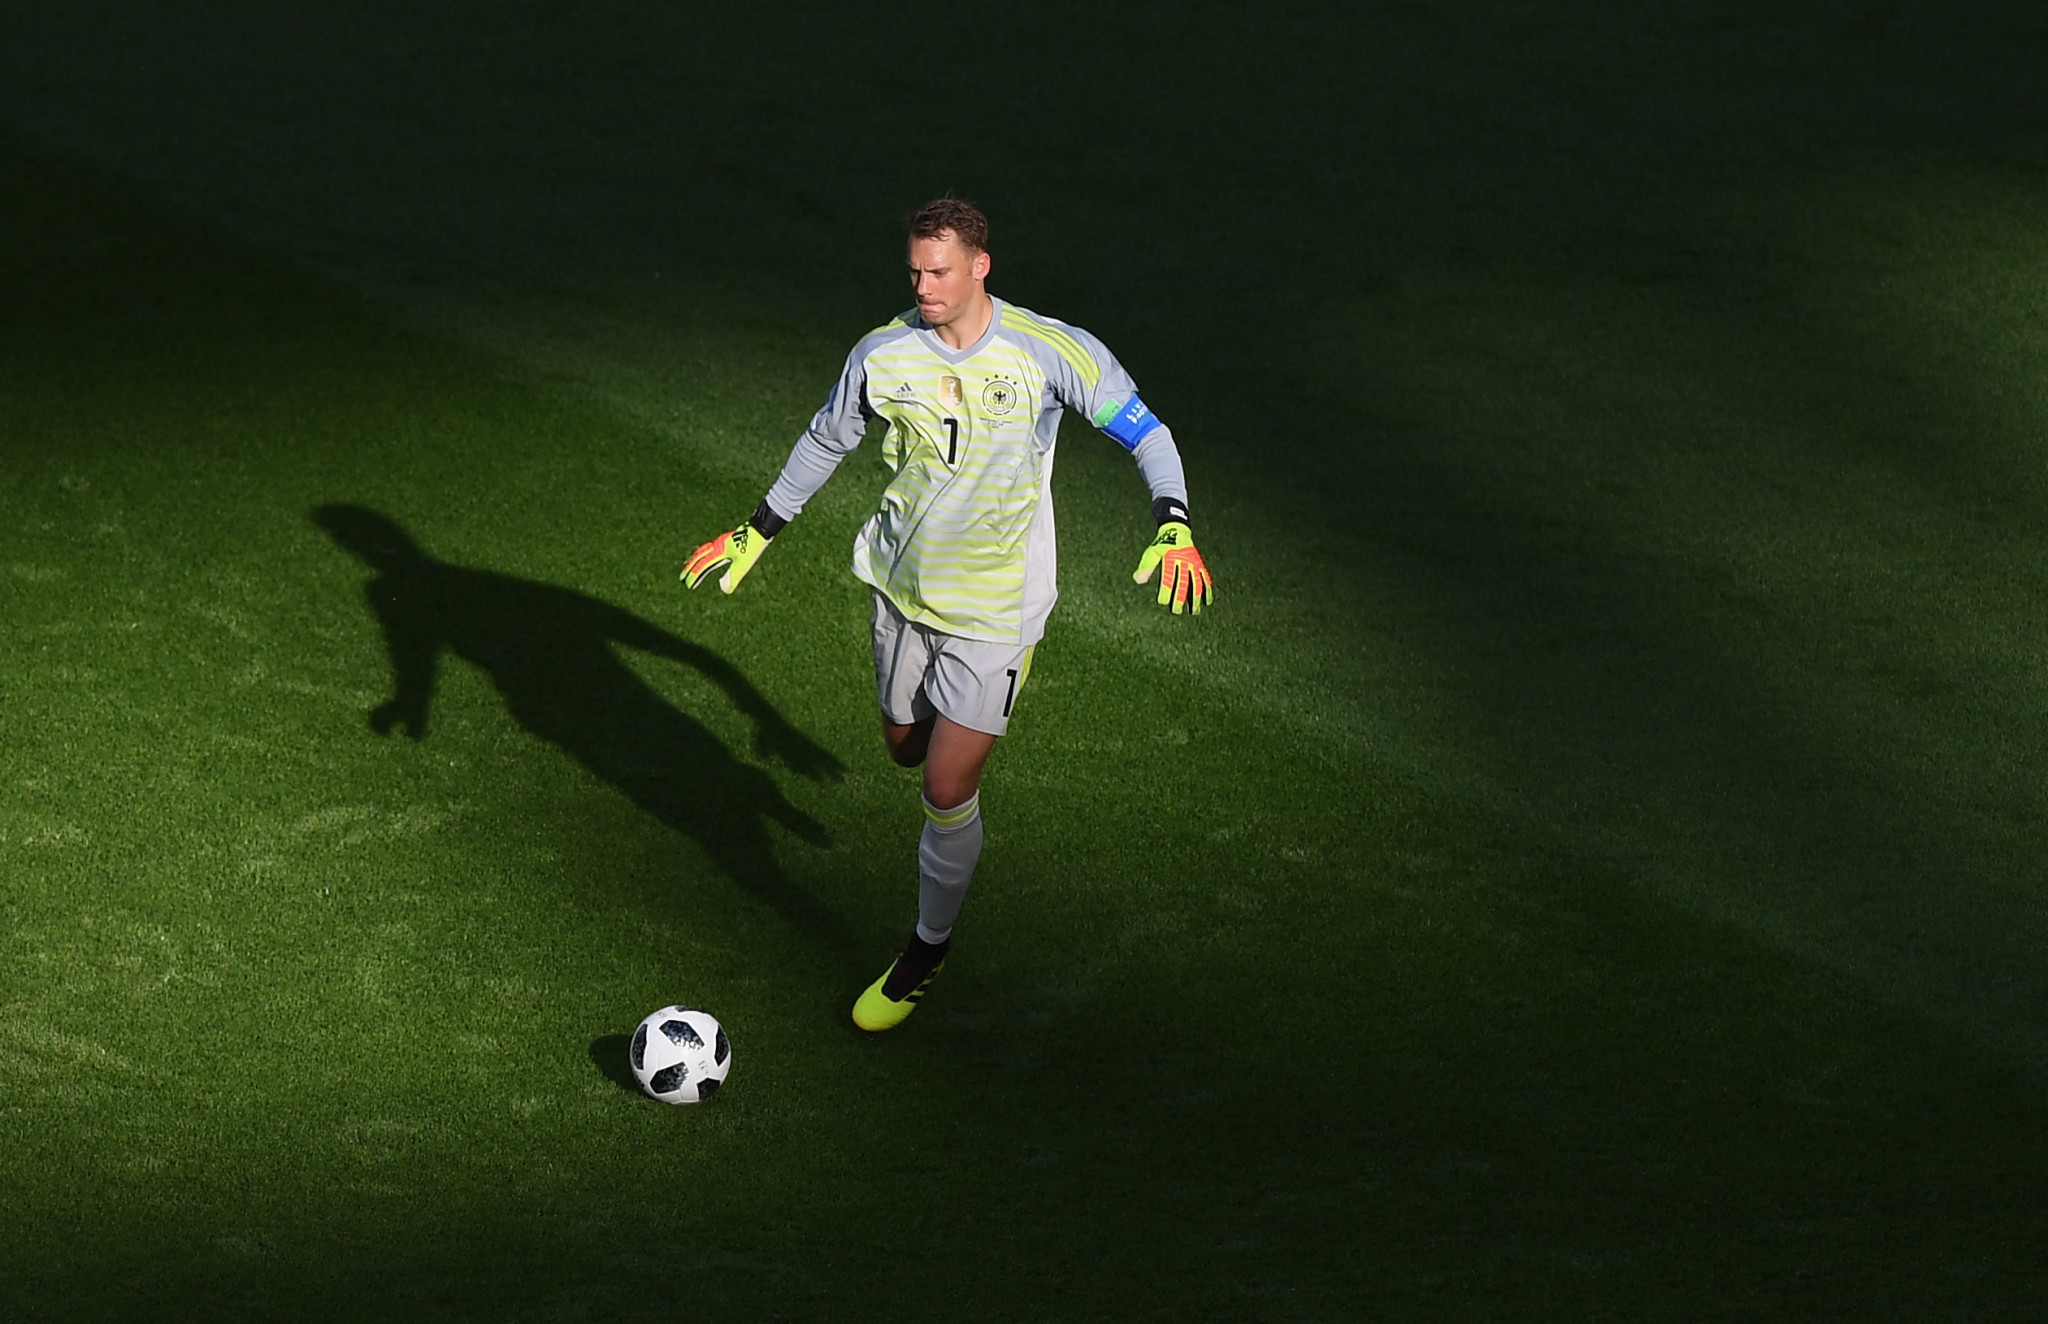 Manuel Neuer had been left stranded after racing out of his goal ©Getty Images